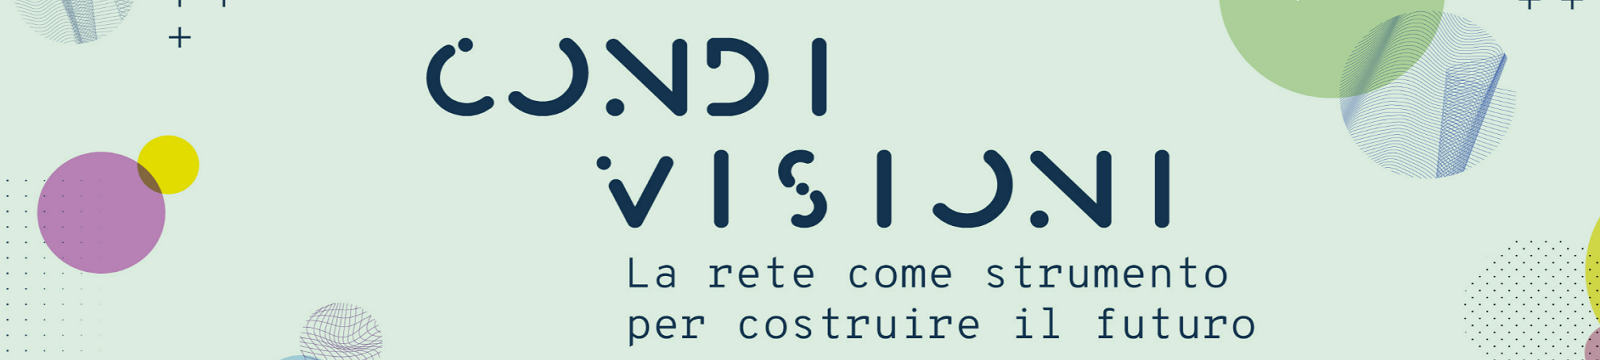 CondiVisioni. The network as a tool for building the future